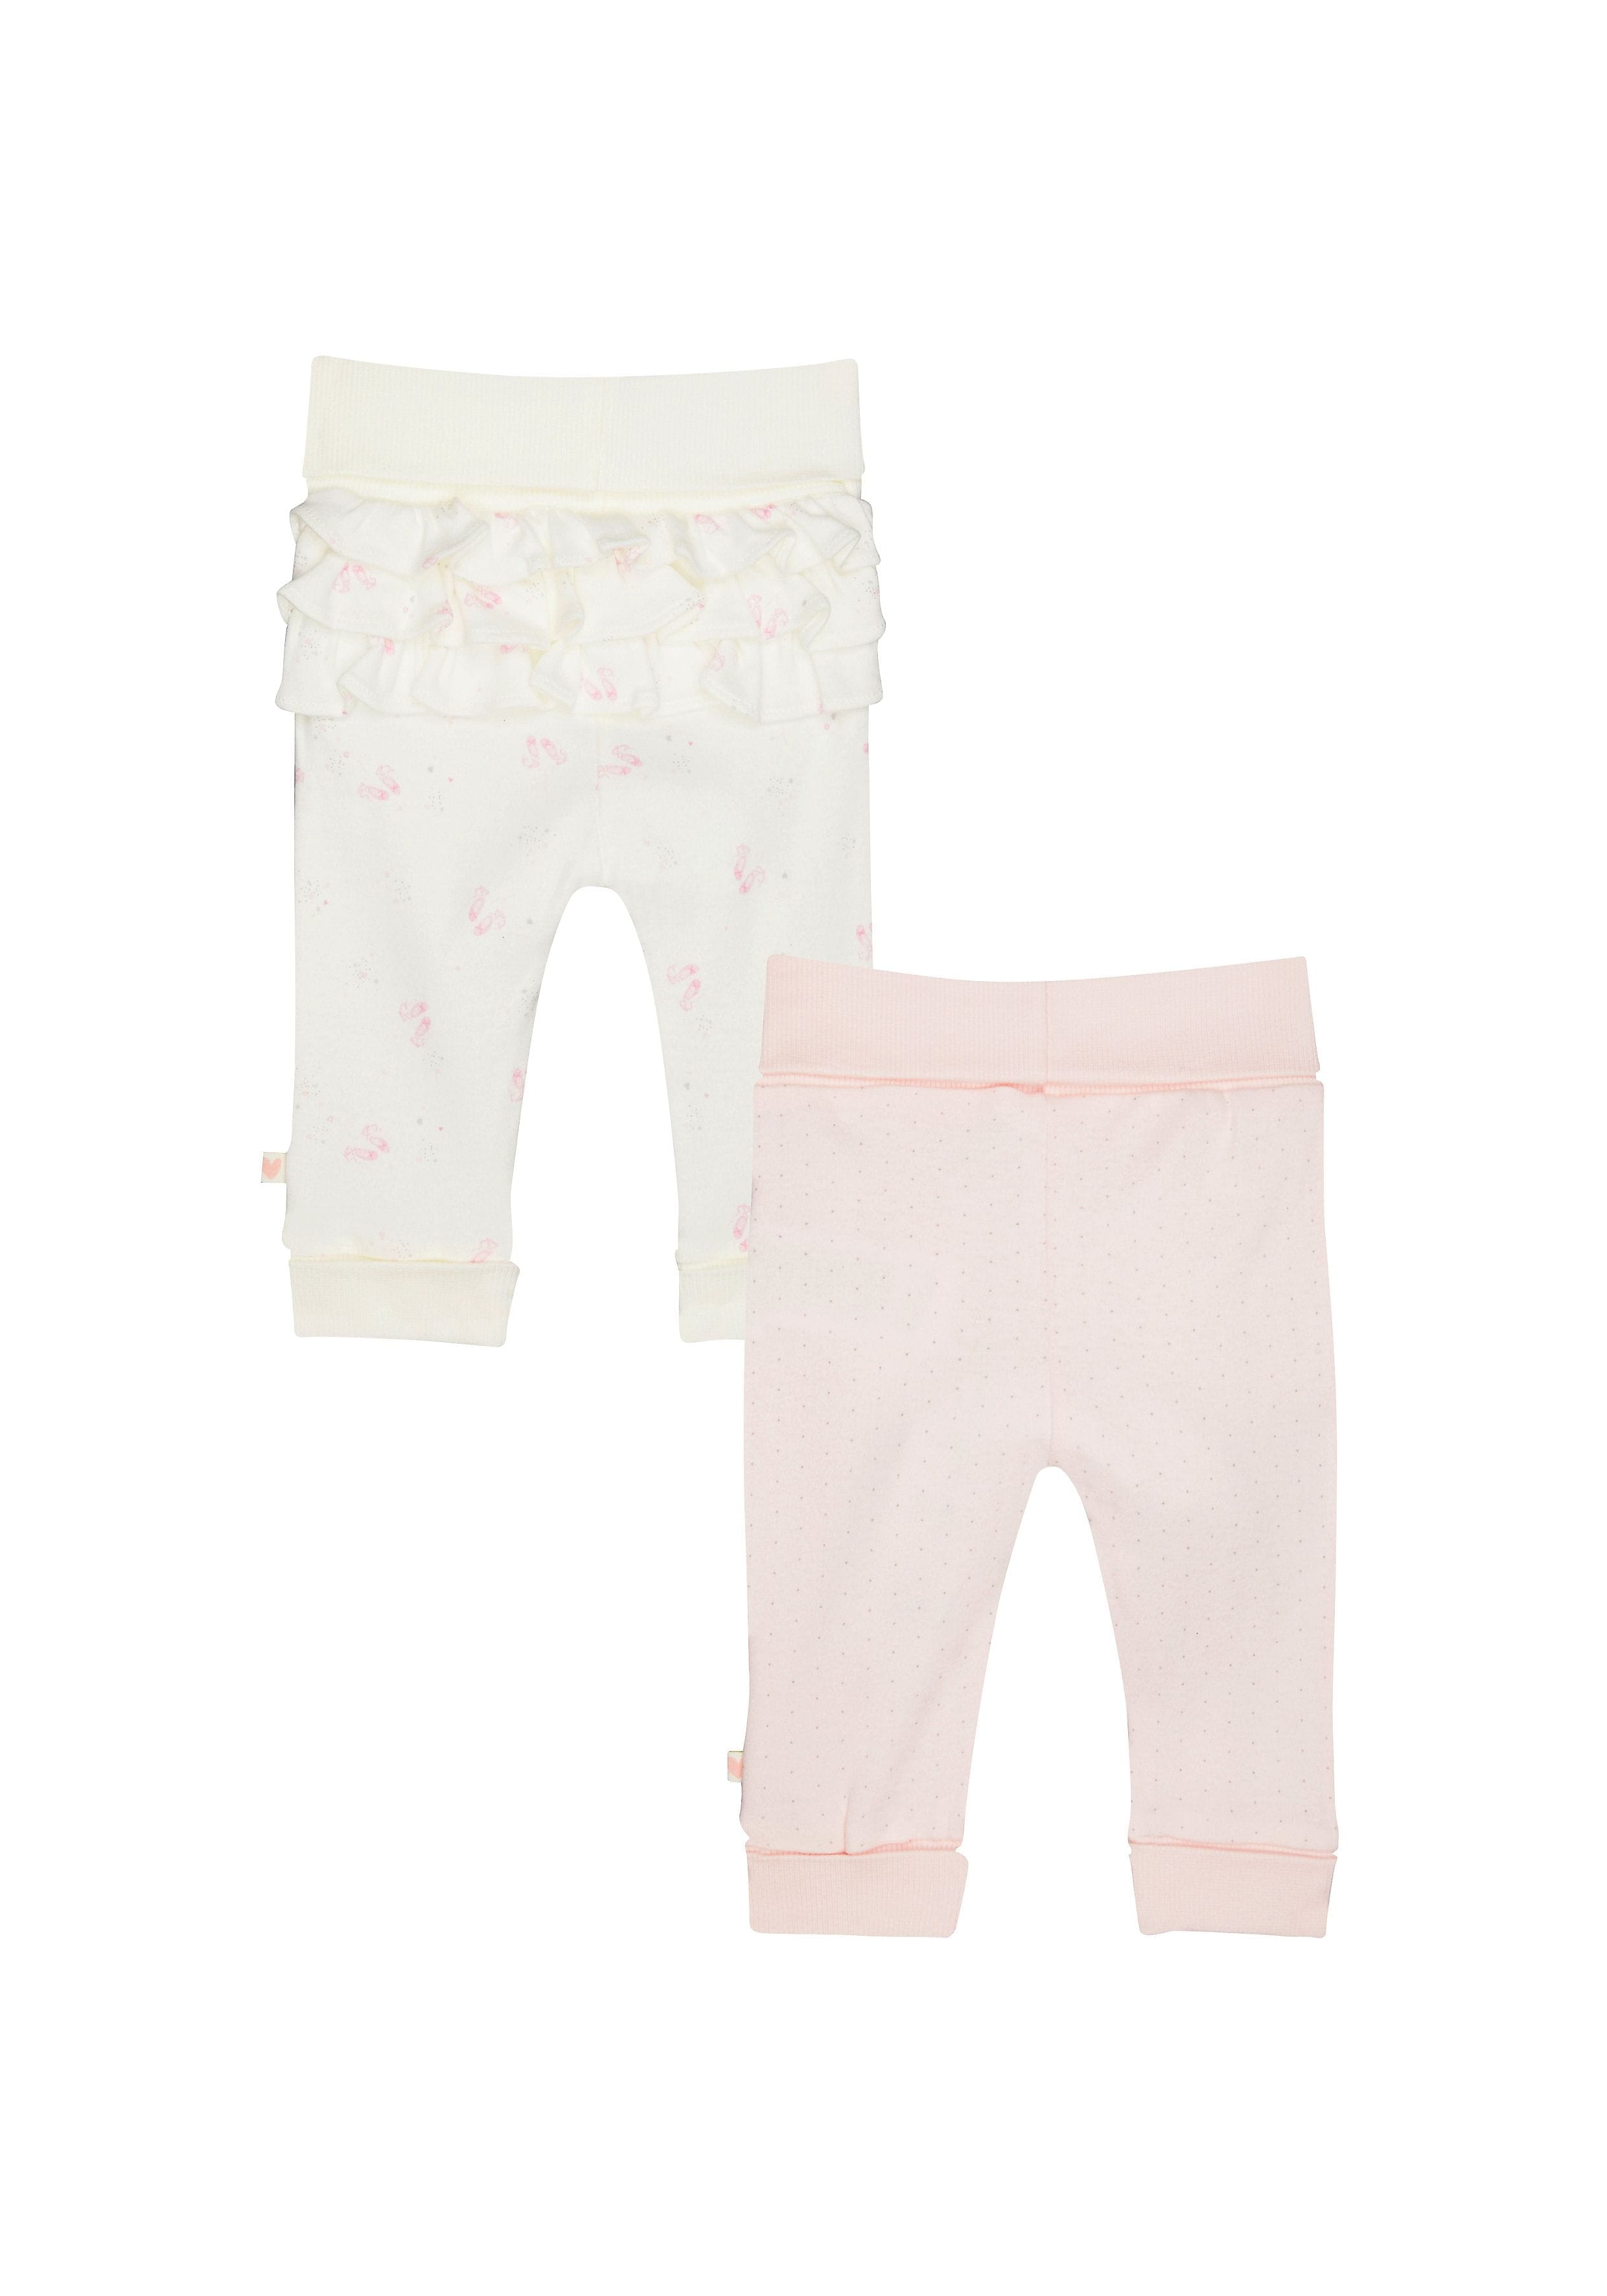 Mothercare | White and Pink Printed Trousers - Pack of 2 0